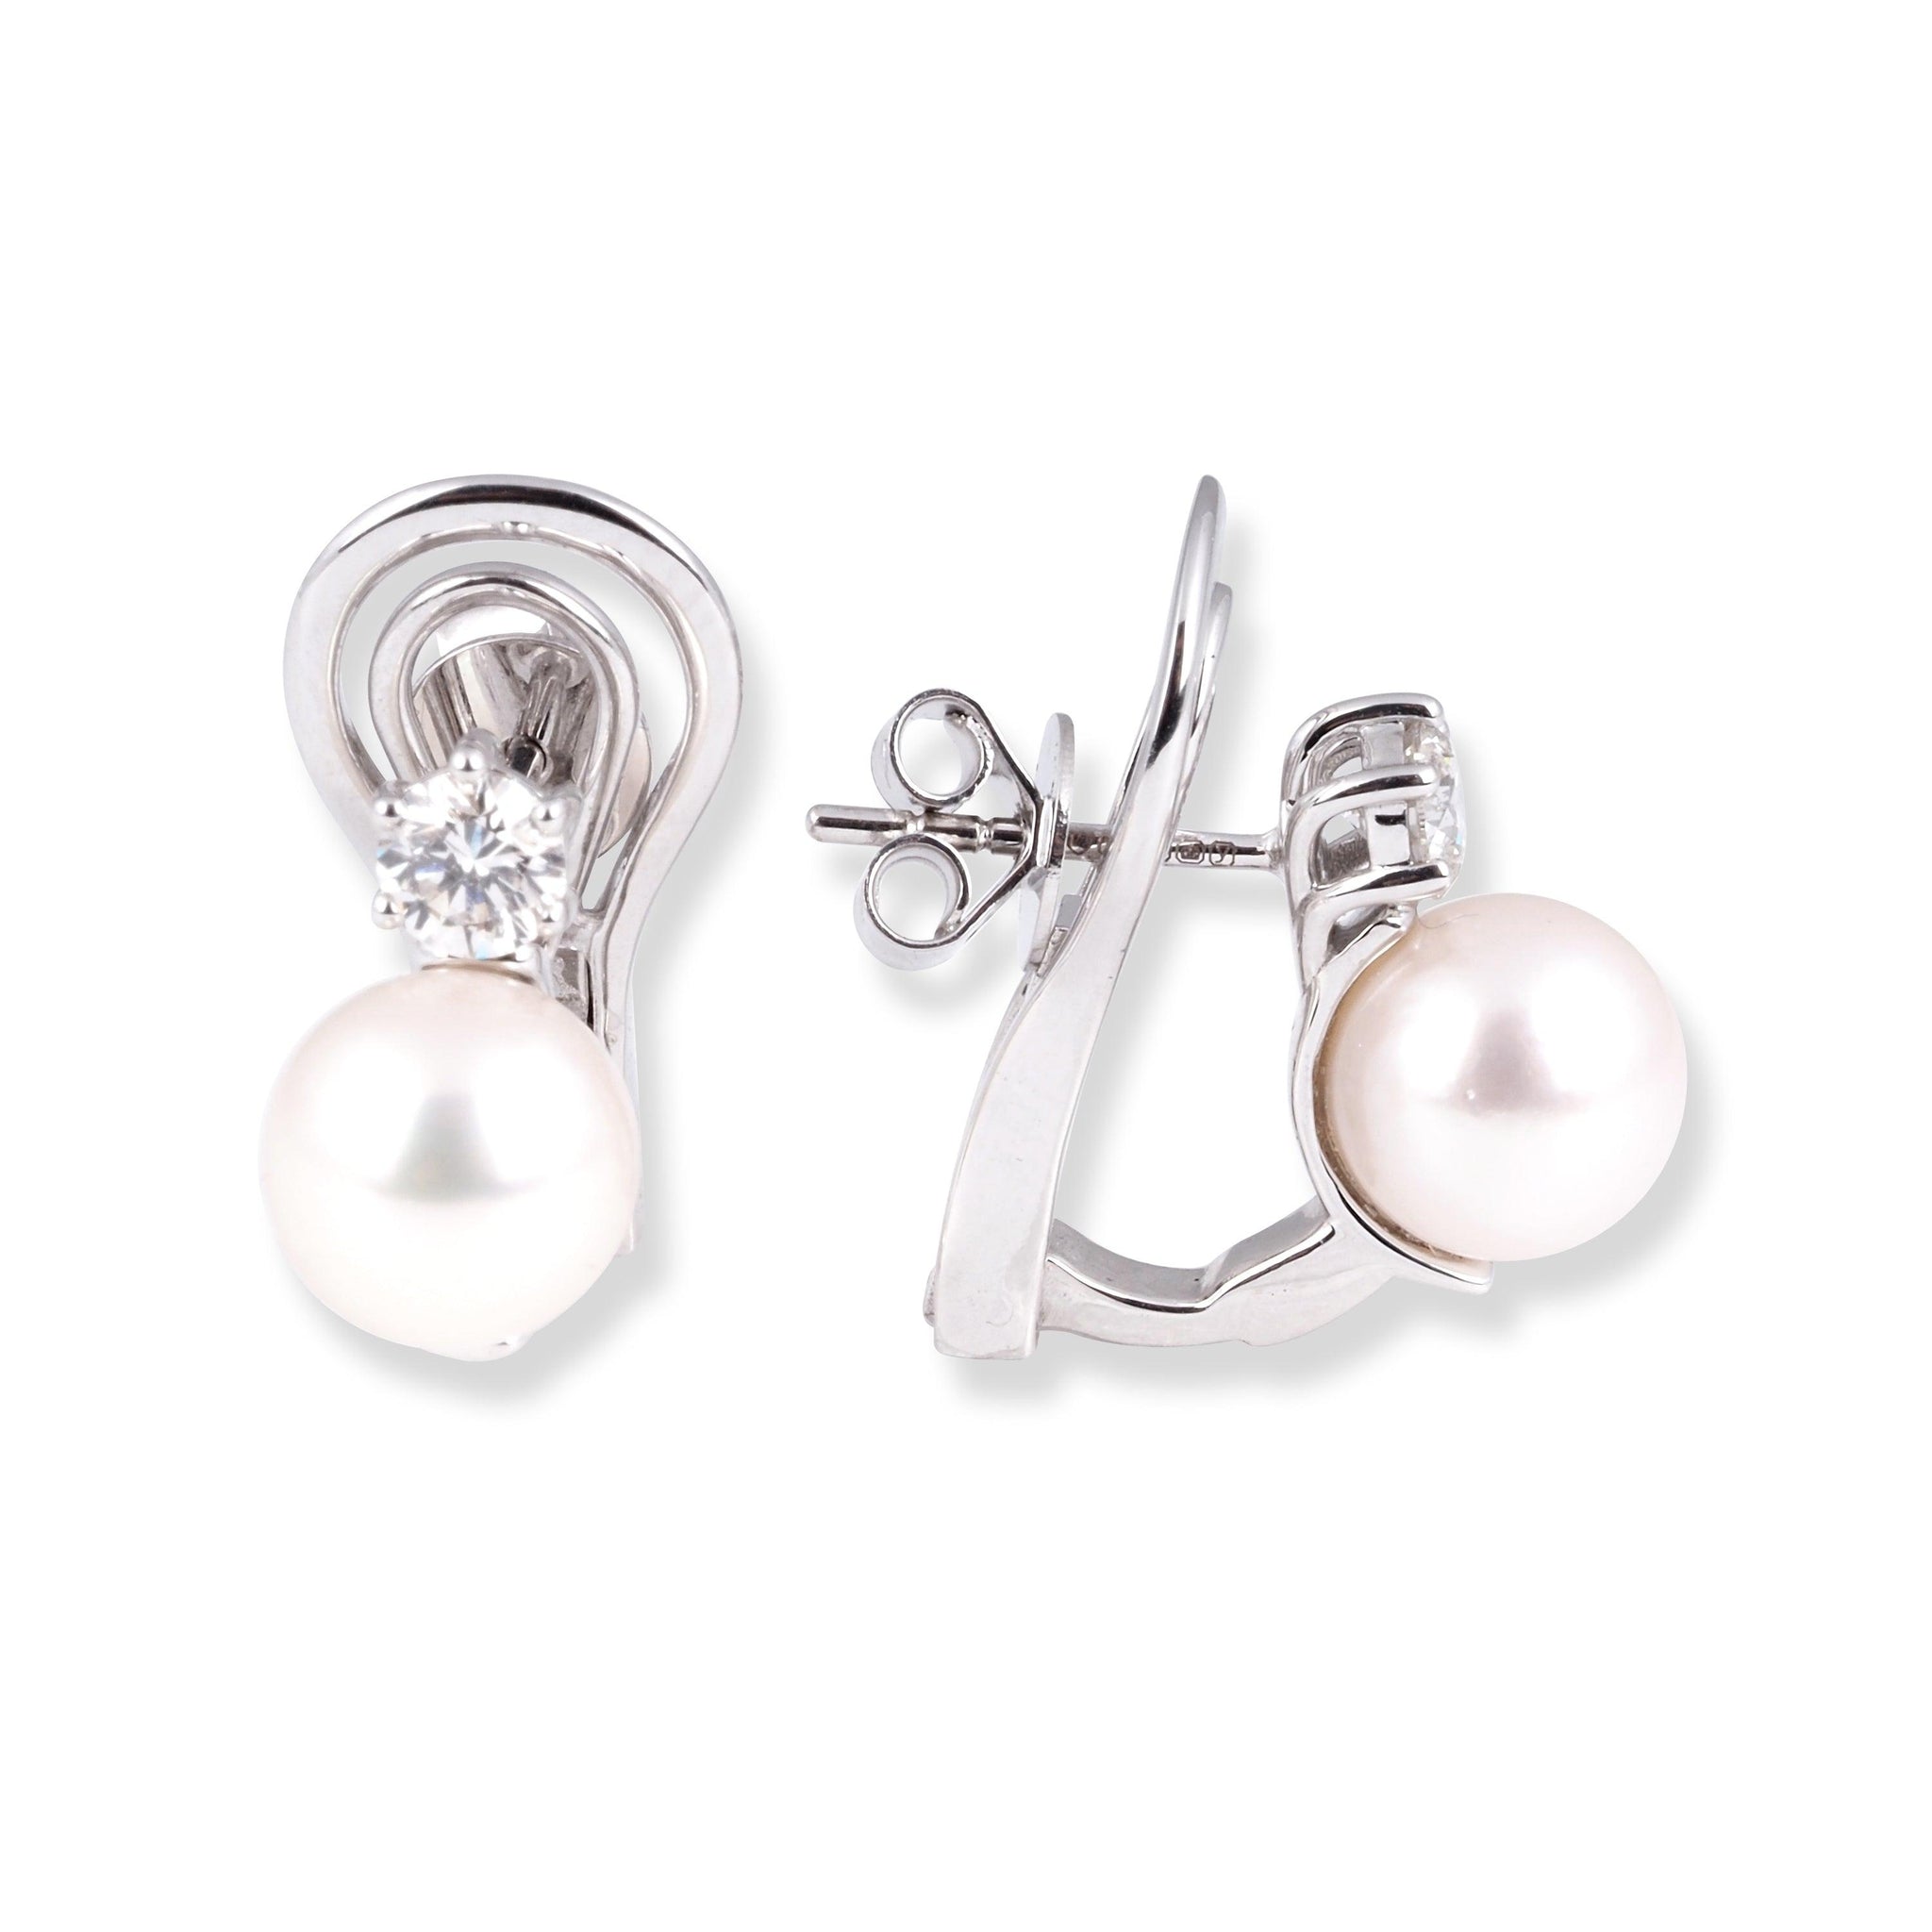 18ct White Gold Diamond and Cultured Pearl Earrings EC53549-2-W